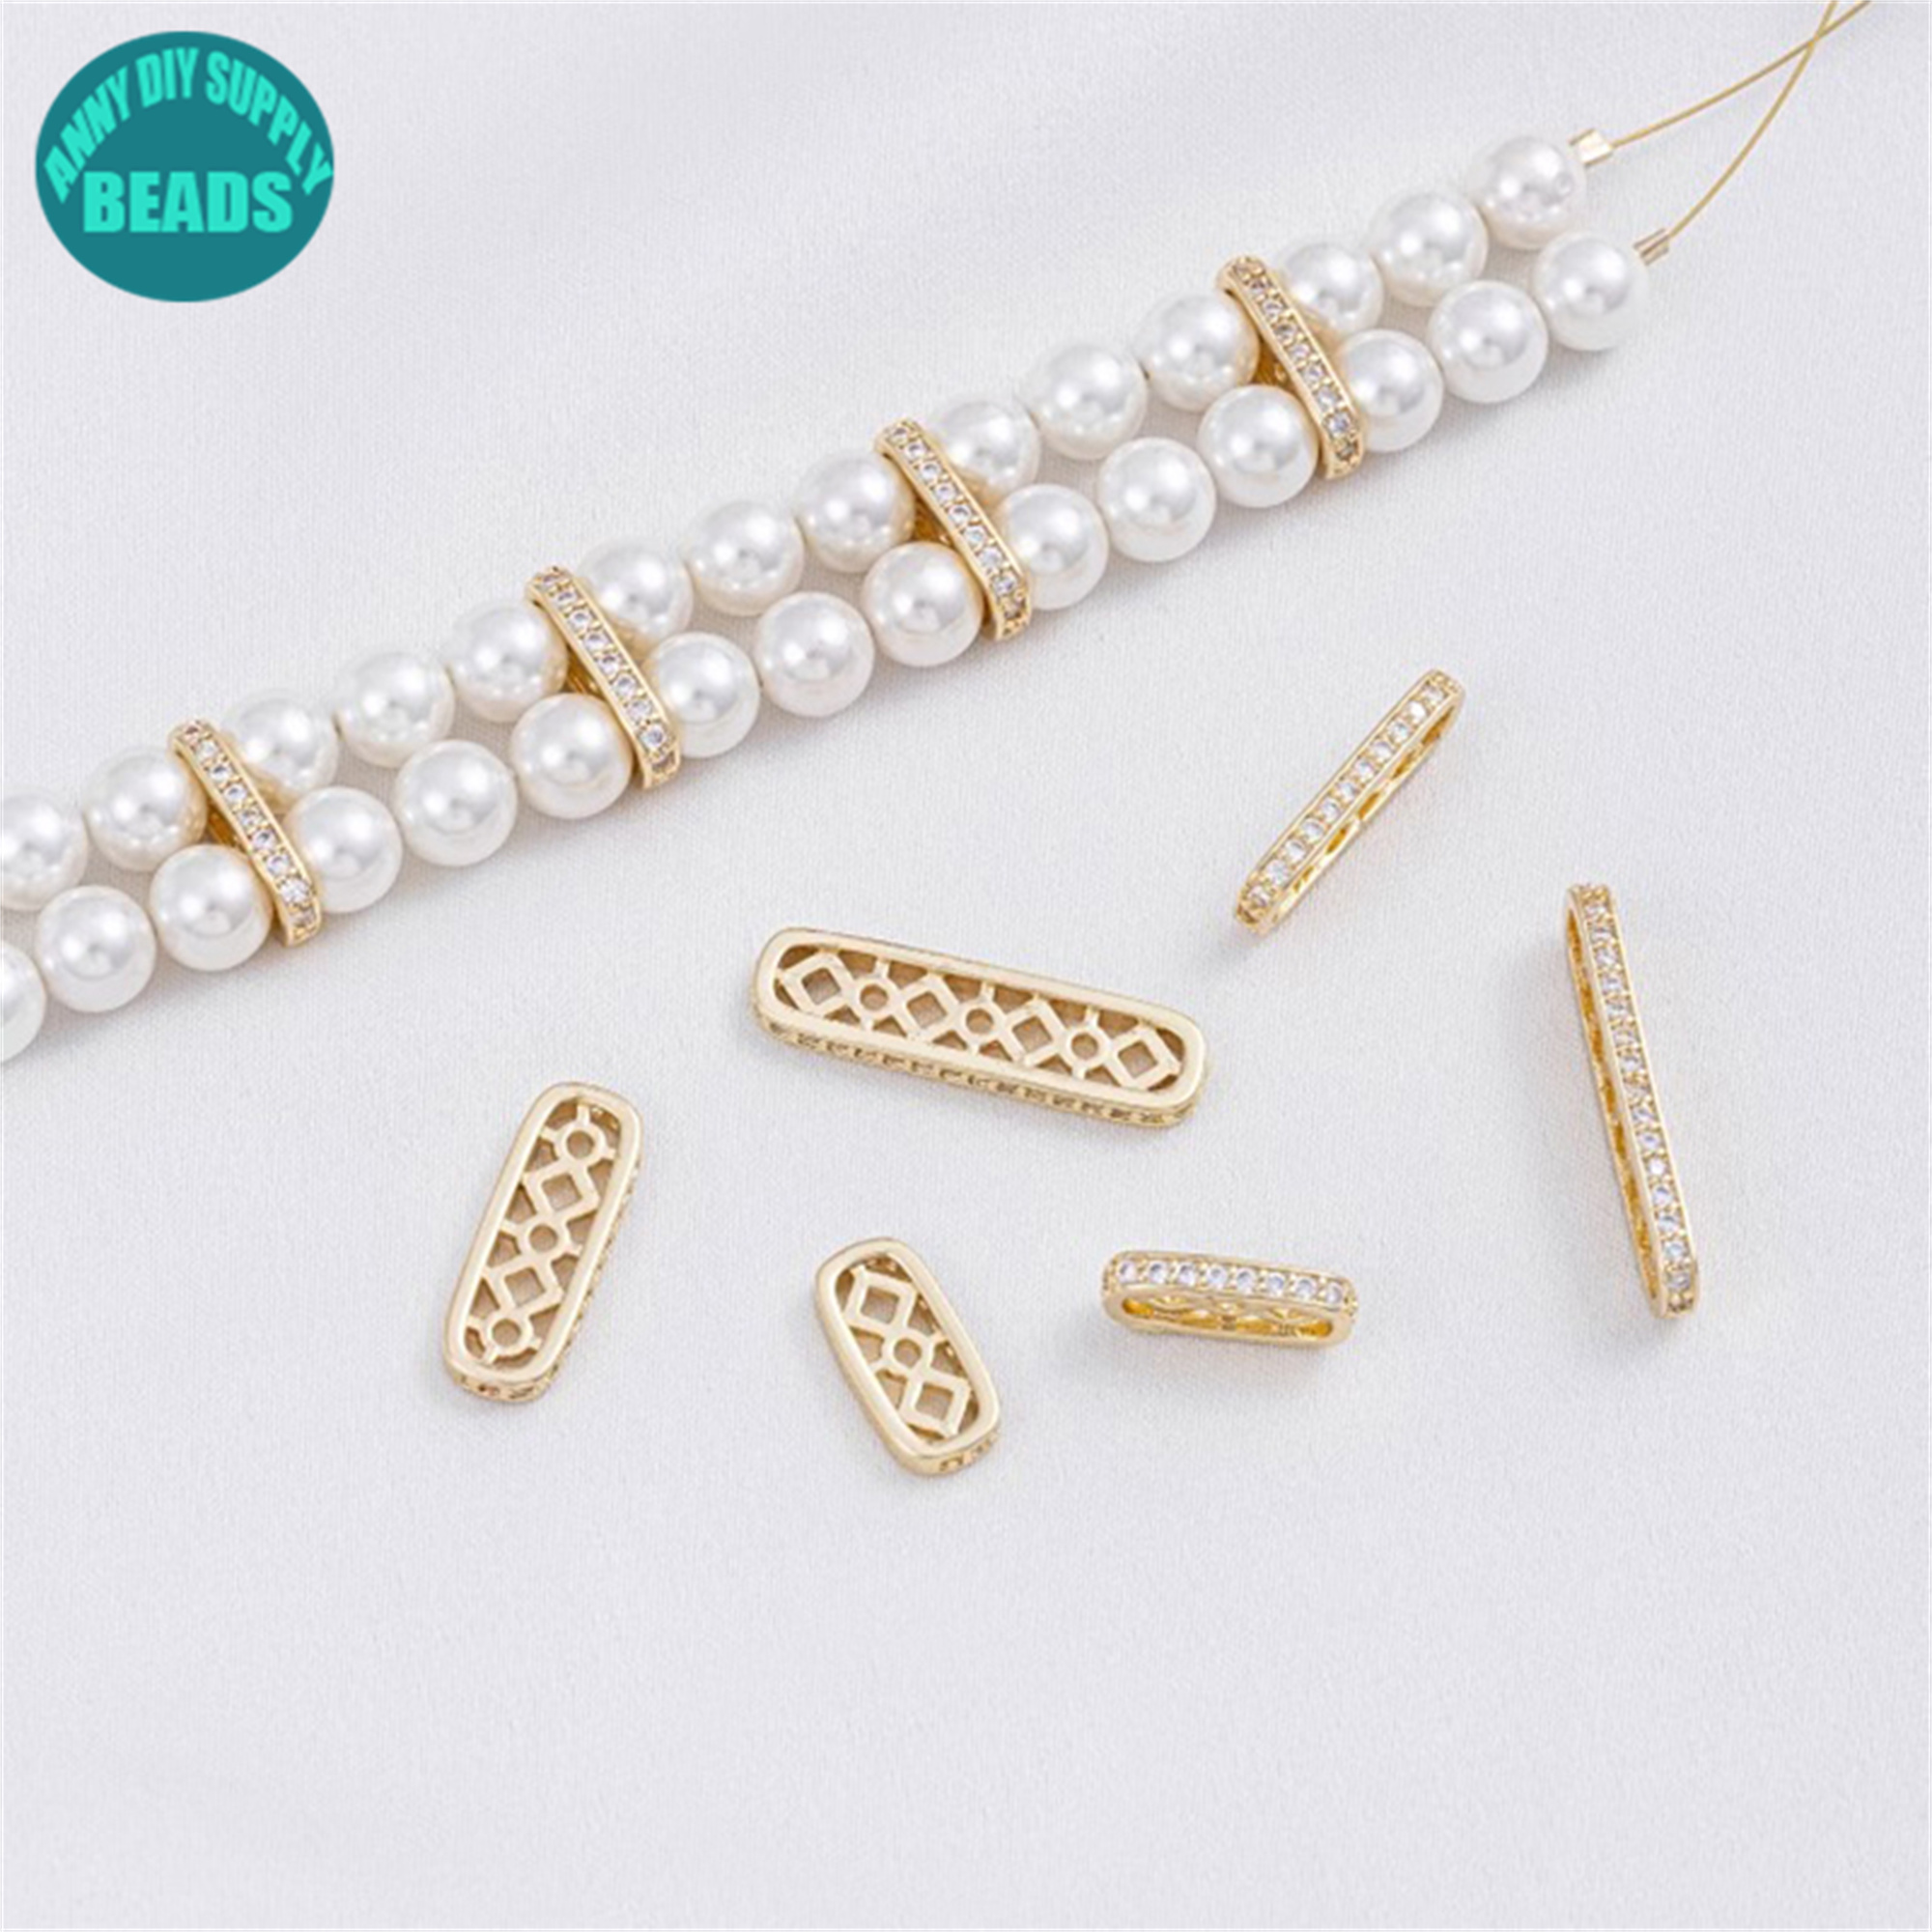 5.2mm 14K Real Gold Plated Brass Spacer Beads,2 Hole Spacer Bars